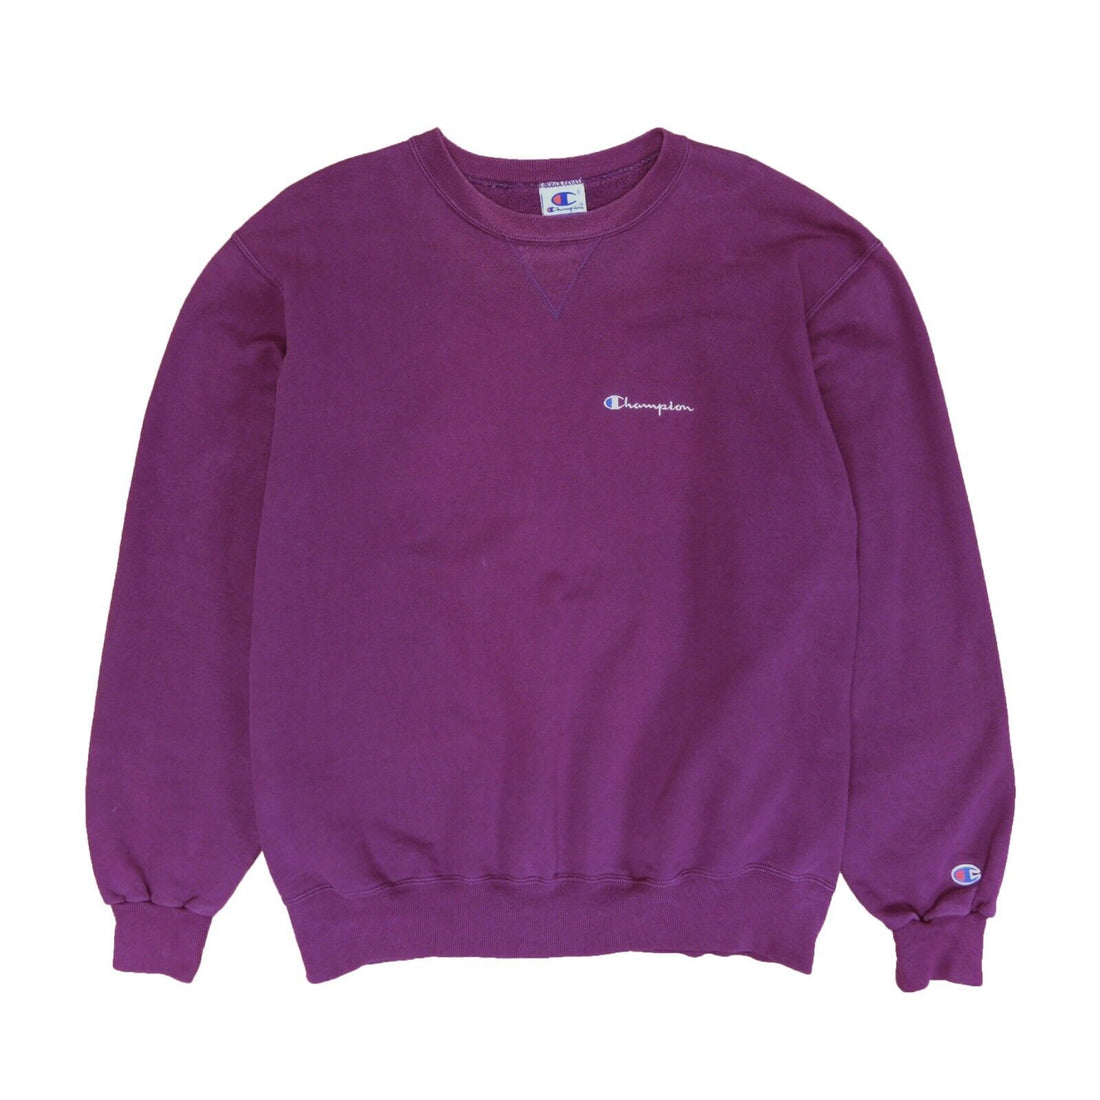 Vintage Champion Spell Out Sweatshirt Crewneck Size XL Purple Embroidered 90s